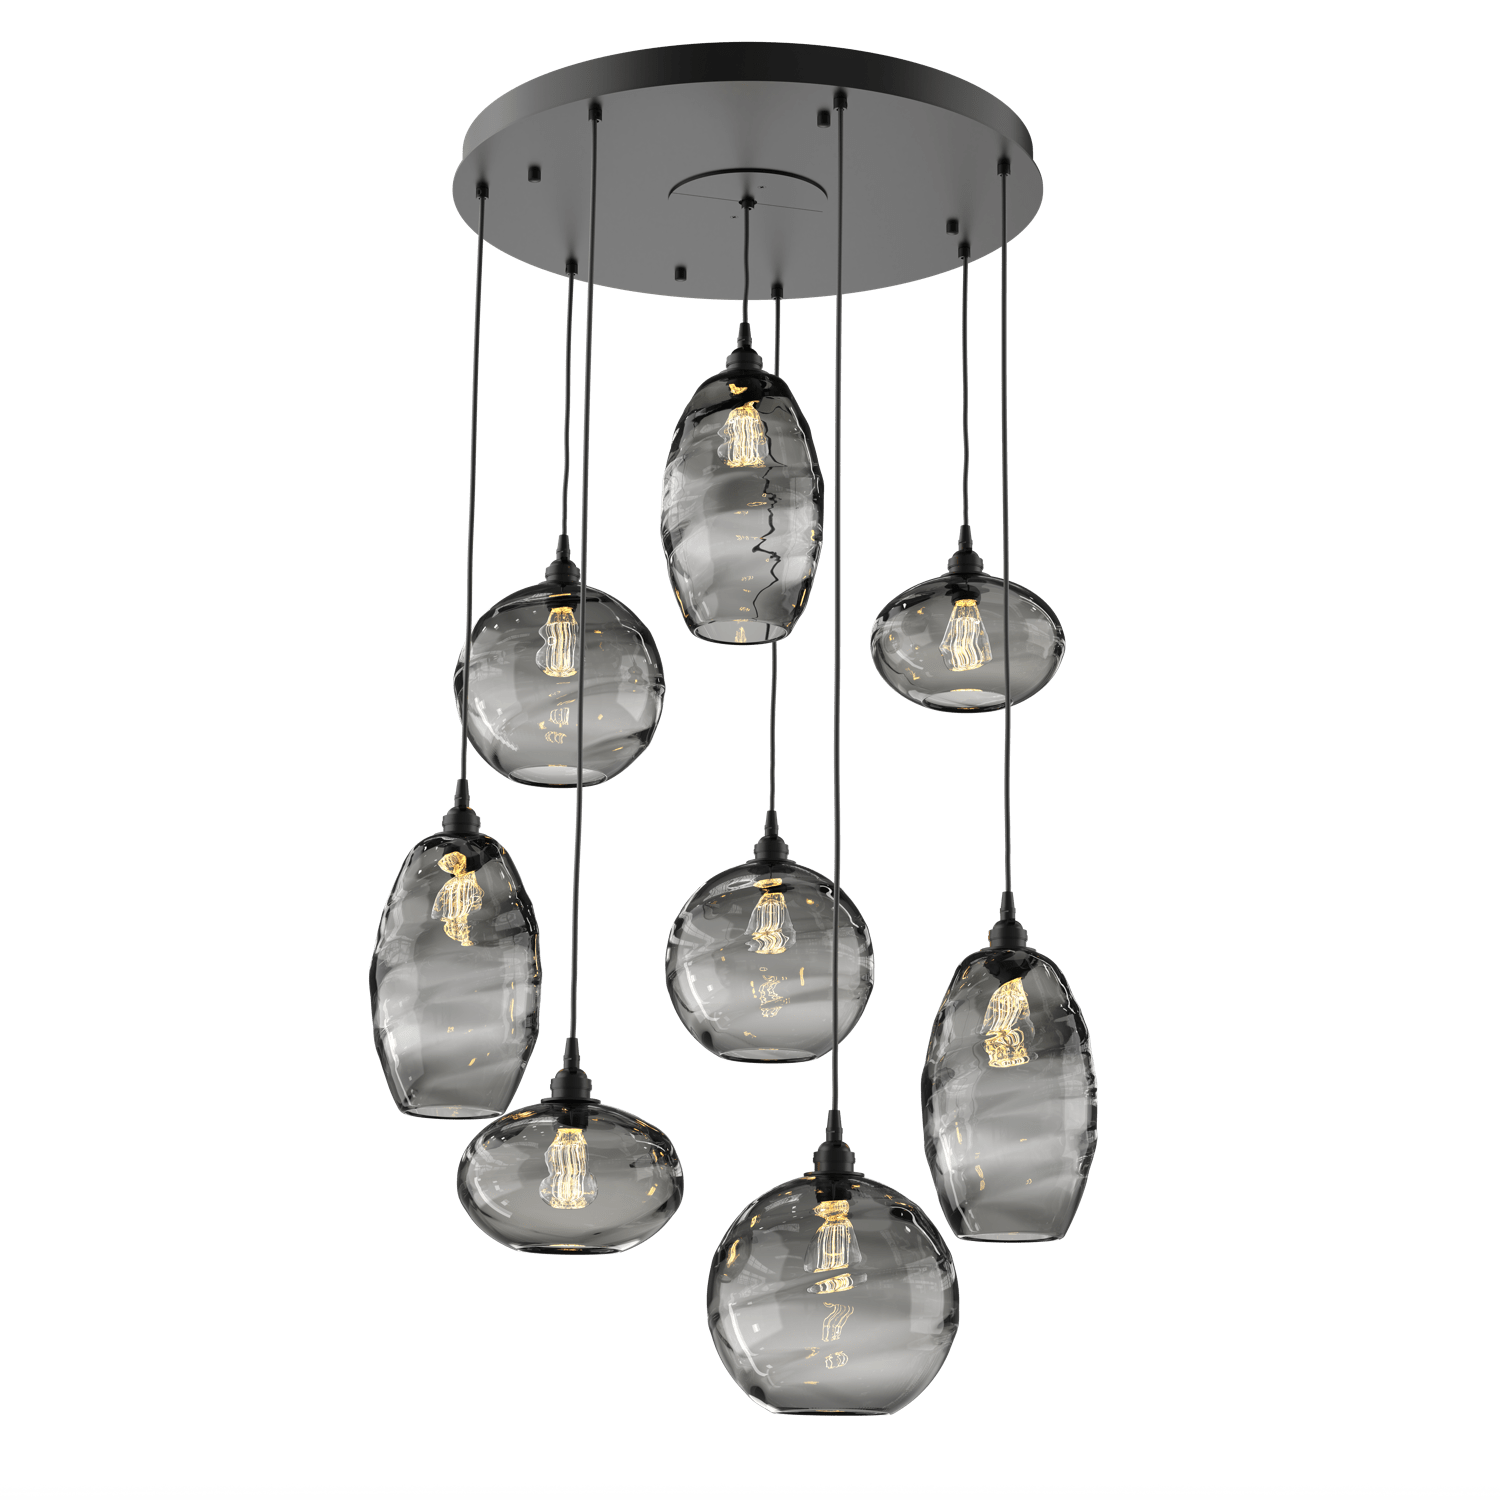 CHB0048-08-MB-OS-Hammerton-Studio-Optic-Blown-Glass-Misto-8-light-round-pendant-chandelier-with-matte-black-finish-and-optic-smoke-blown-glass-shades-and-incandescent-lamping